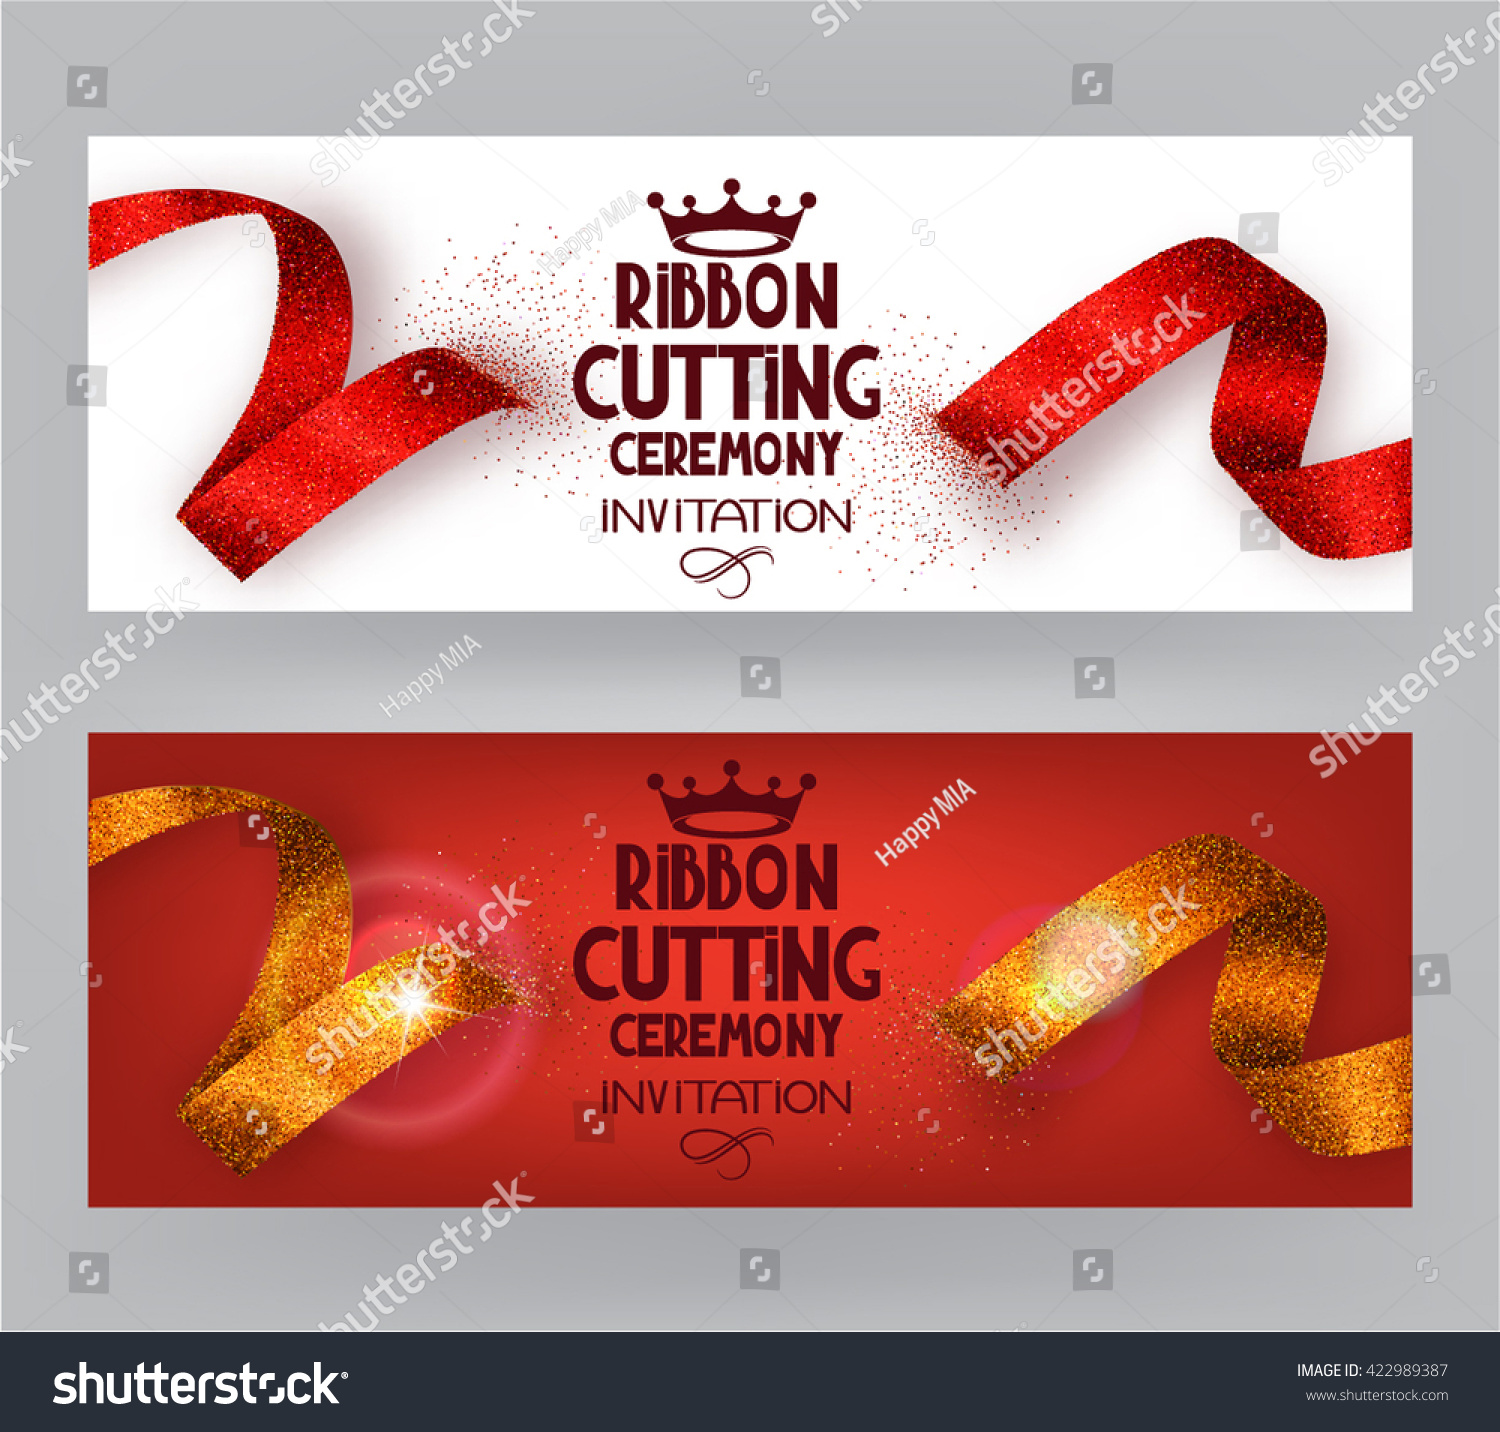 Ribbon cutting ceremony banners with abstract ribbons  and abstract hand with scissors #422989387